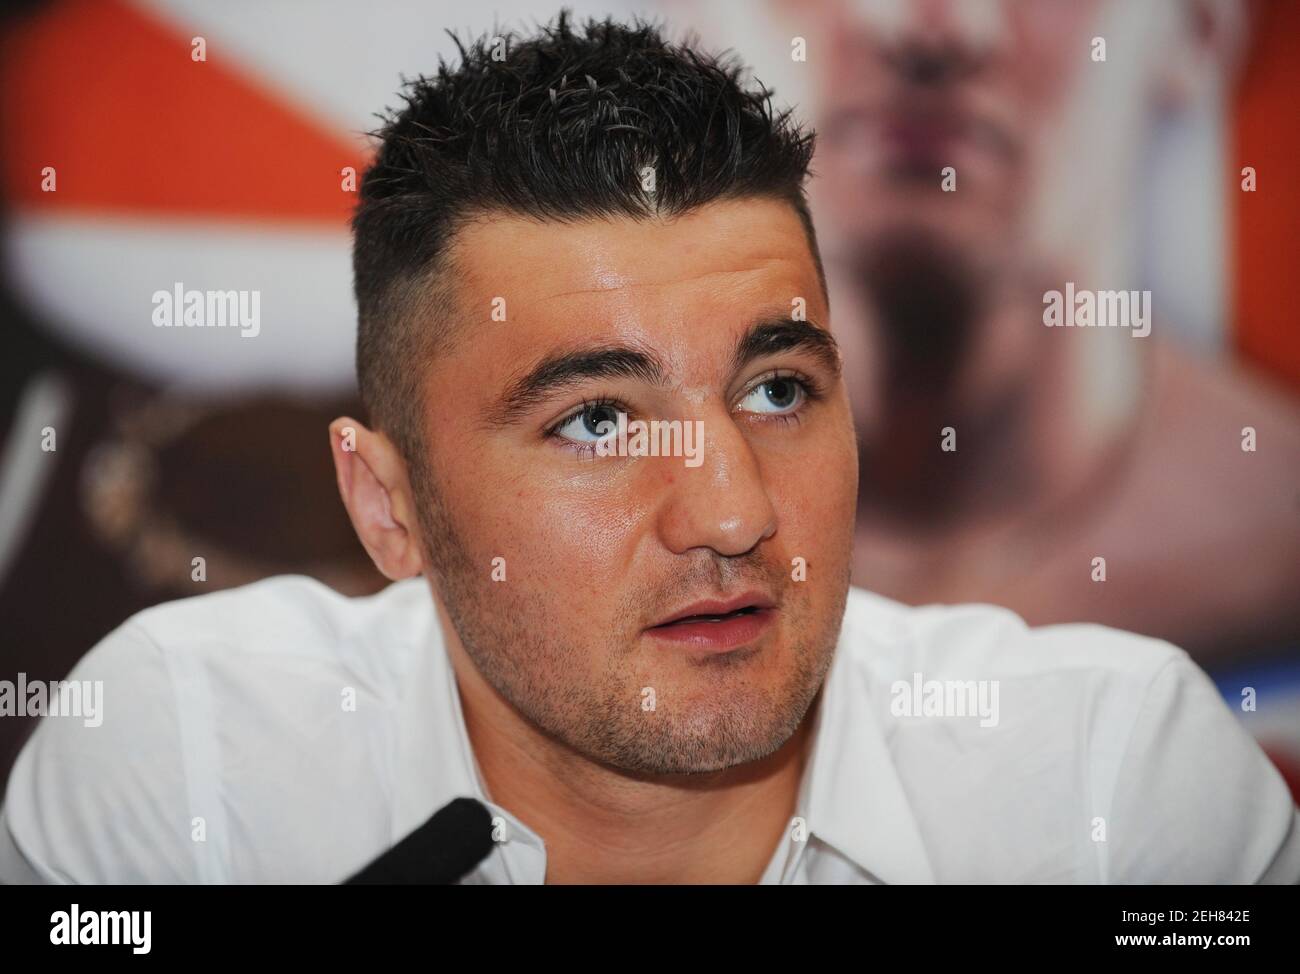 Boxing - Ricky Burns, Nathan Cleverly, George Groves & Dereck Chisora Press Conference  - Landmark Hotel, London - 14/1/13  Nathan Cleverly during the press conference  Mandatory Credit: Action Images / Henry Browne  Livepic Stock Photo